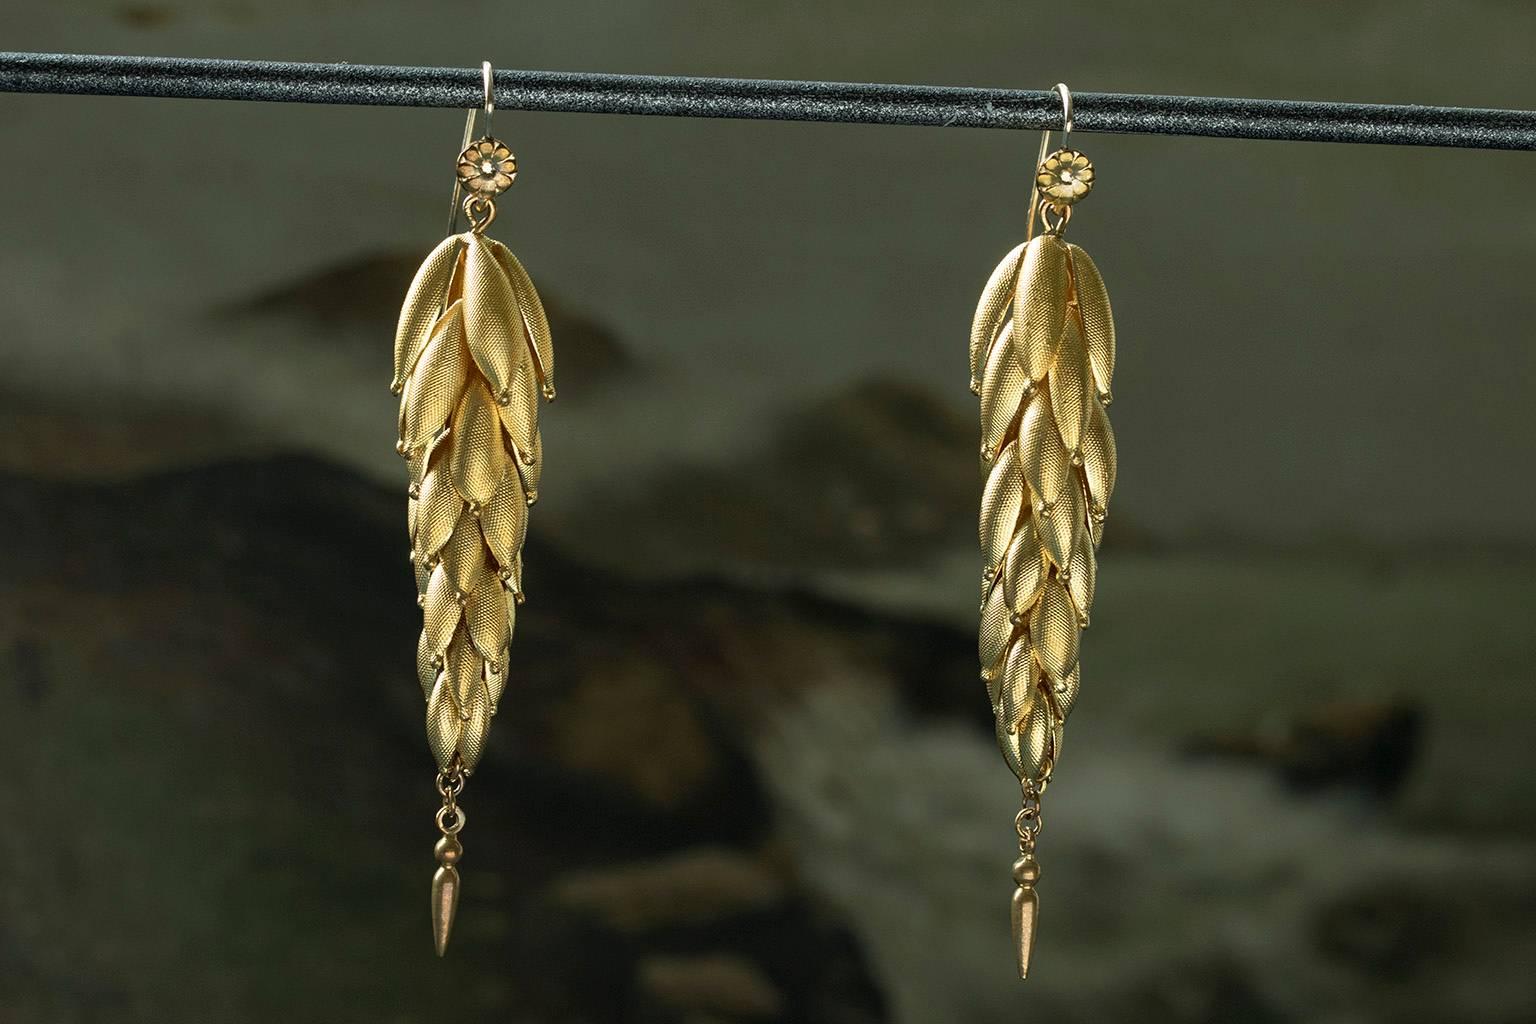 C.1860. A gorgeous pair of Victorian Pinchbeck drop earrings. The earrings are beautifully made in the shape of wheat sheaf, and give great movement when worn. Wheat in Victorian symbolism represents resurrection. These are lightweight, and the ear